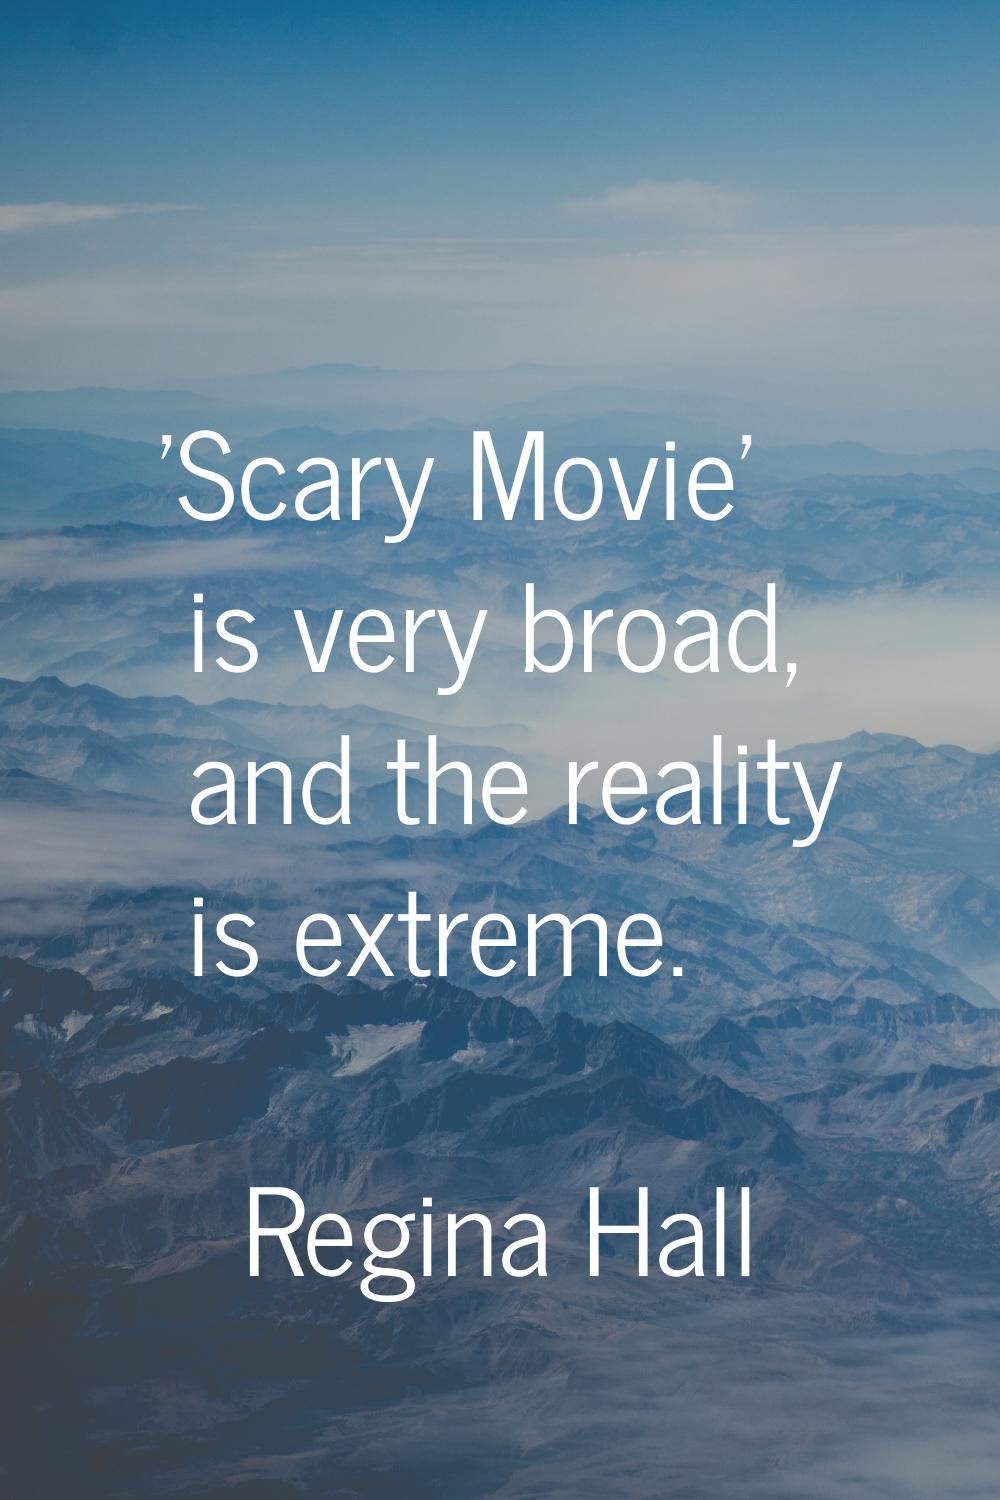 'Scary Movie' is very broad, and the reality is extreme.